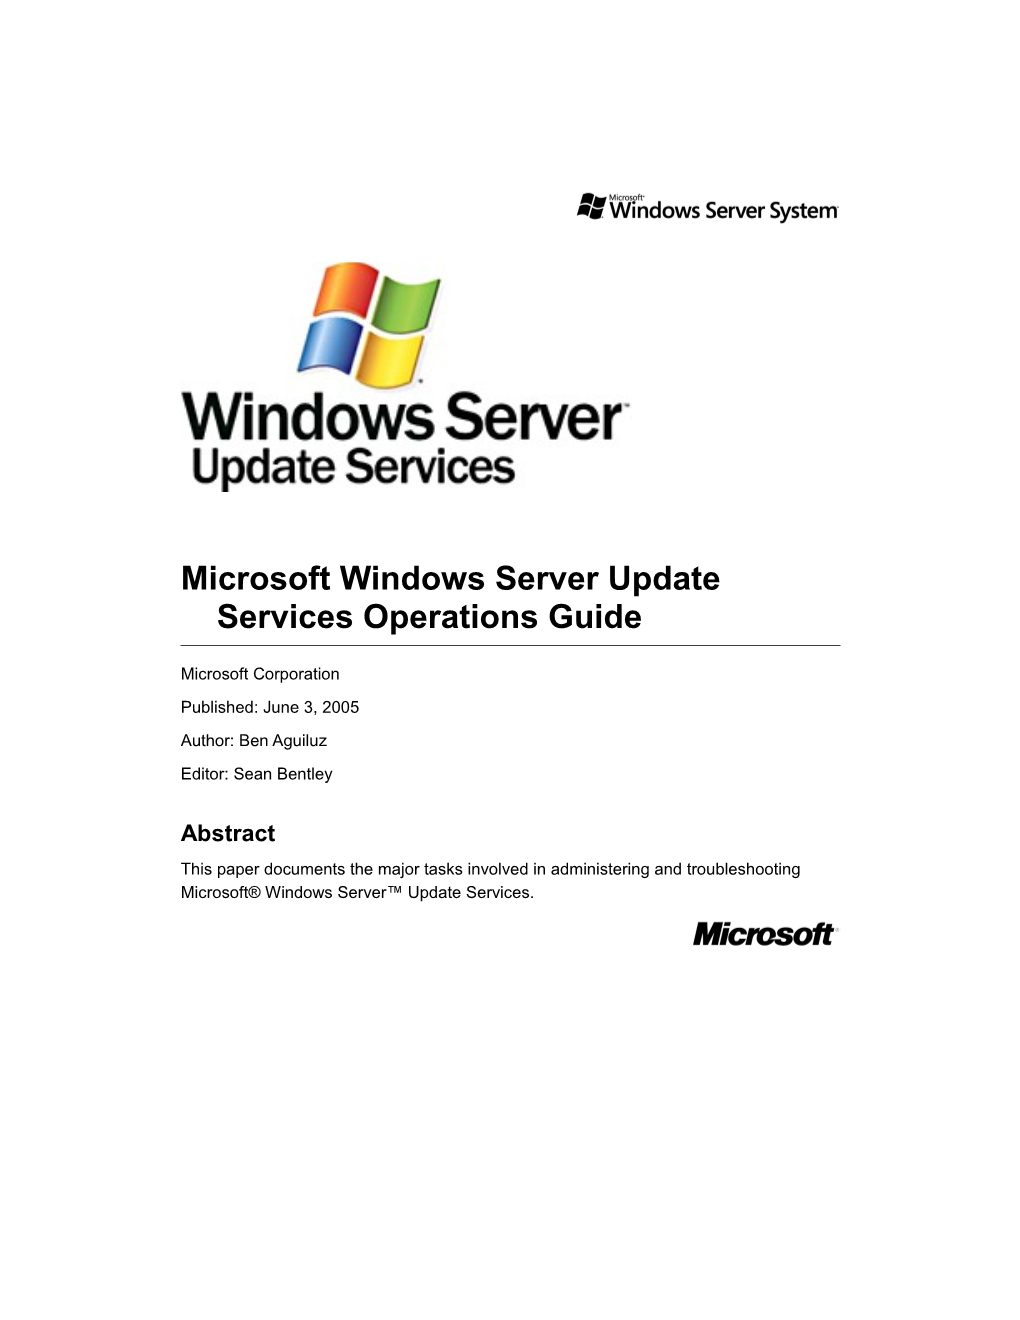 Microsoft Windows Server Update Services Operations Guide